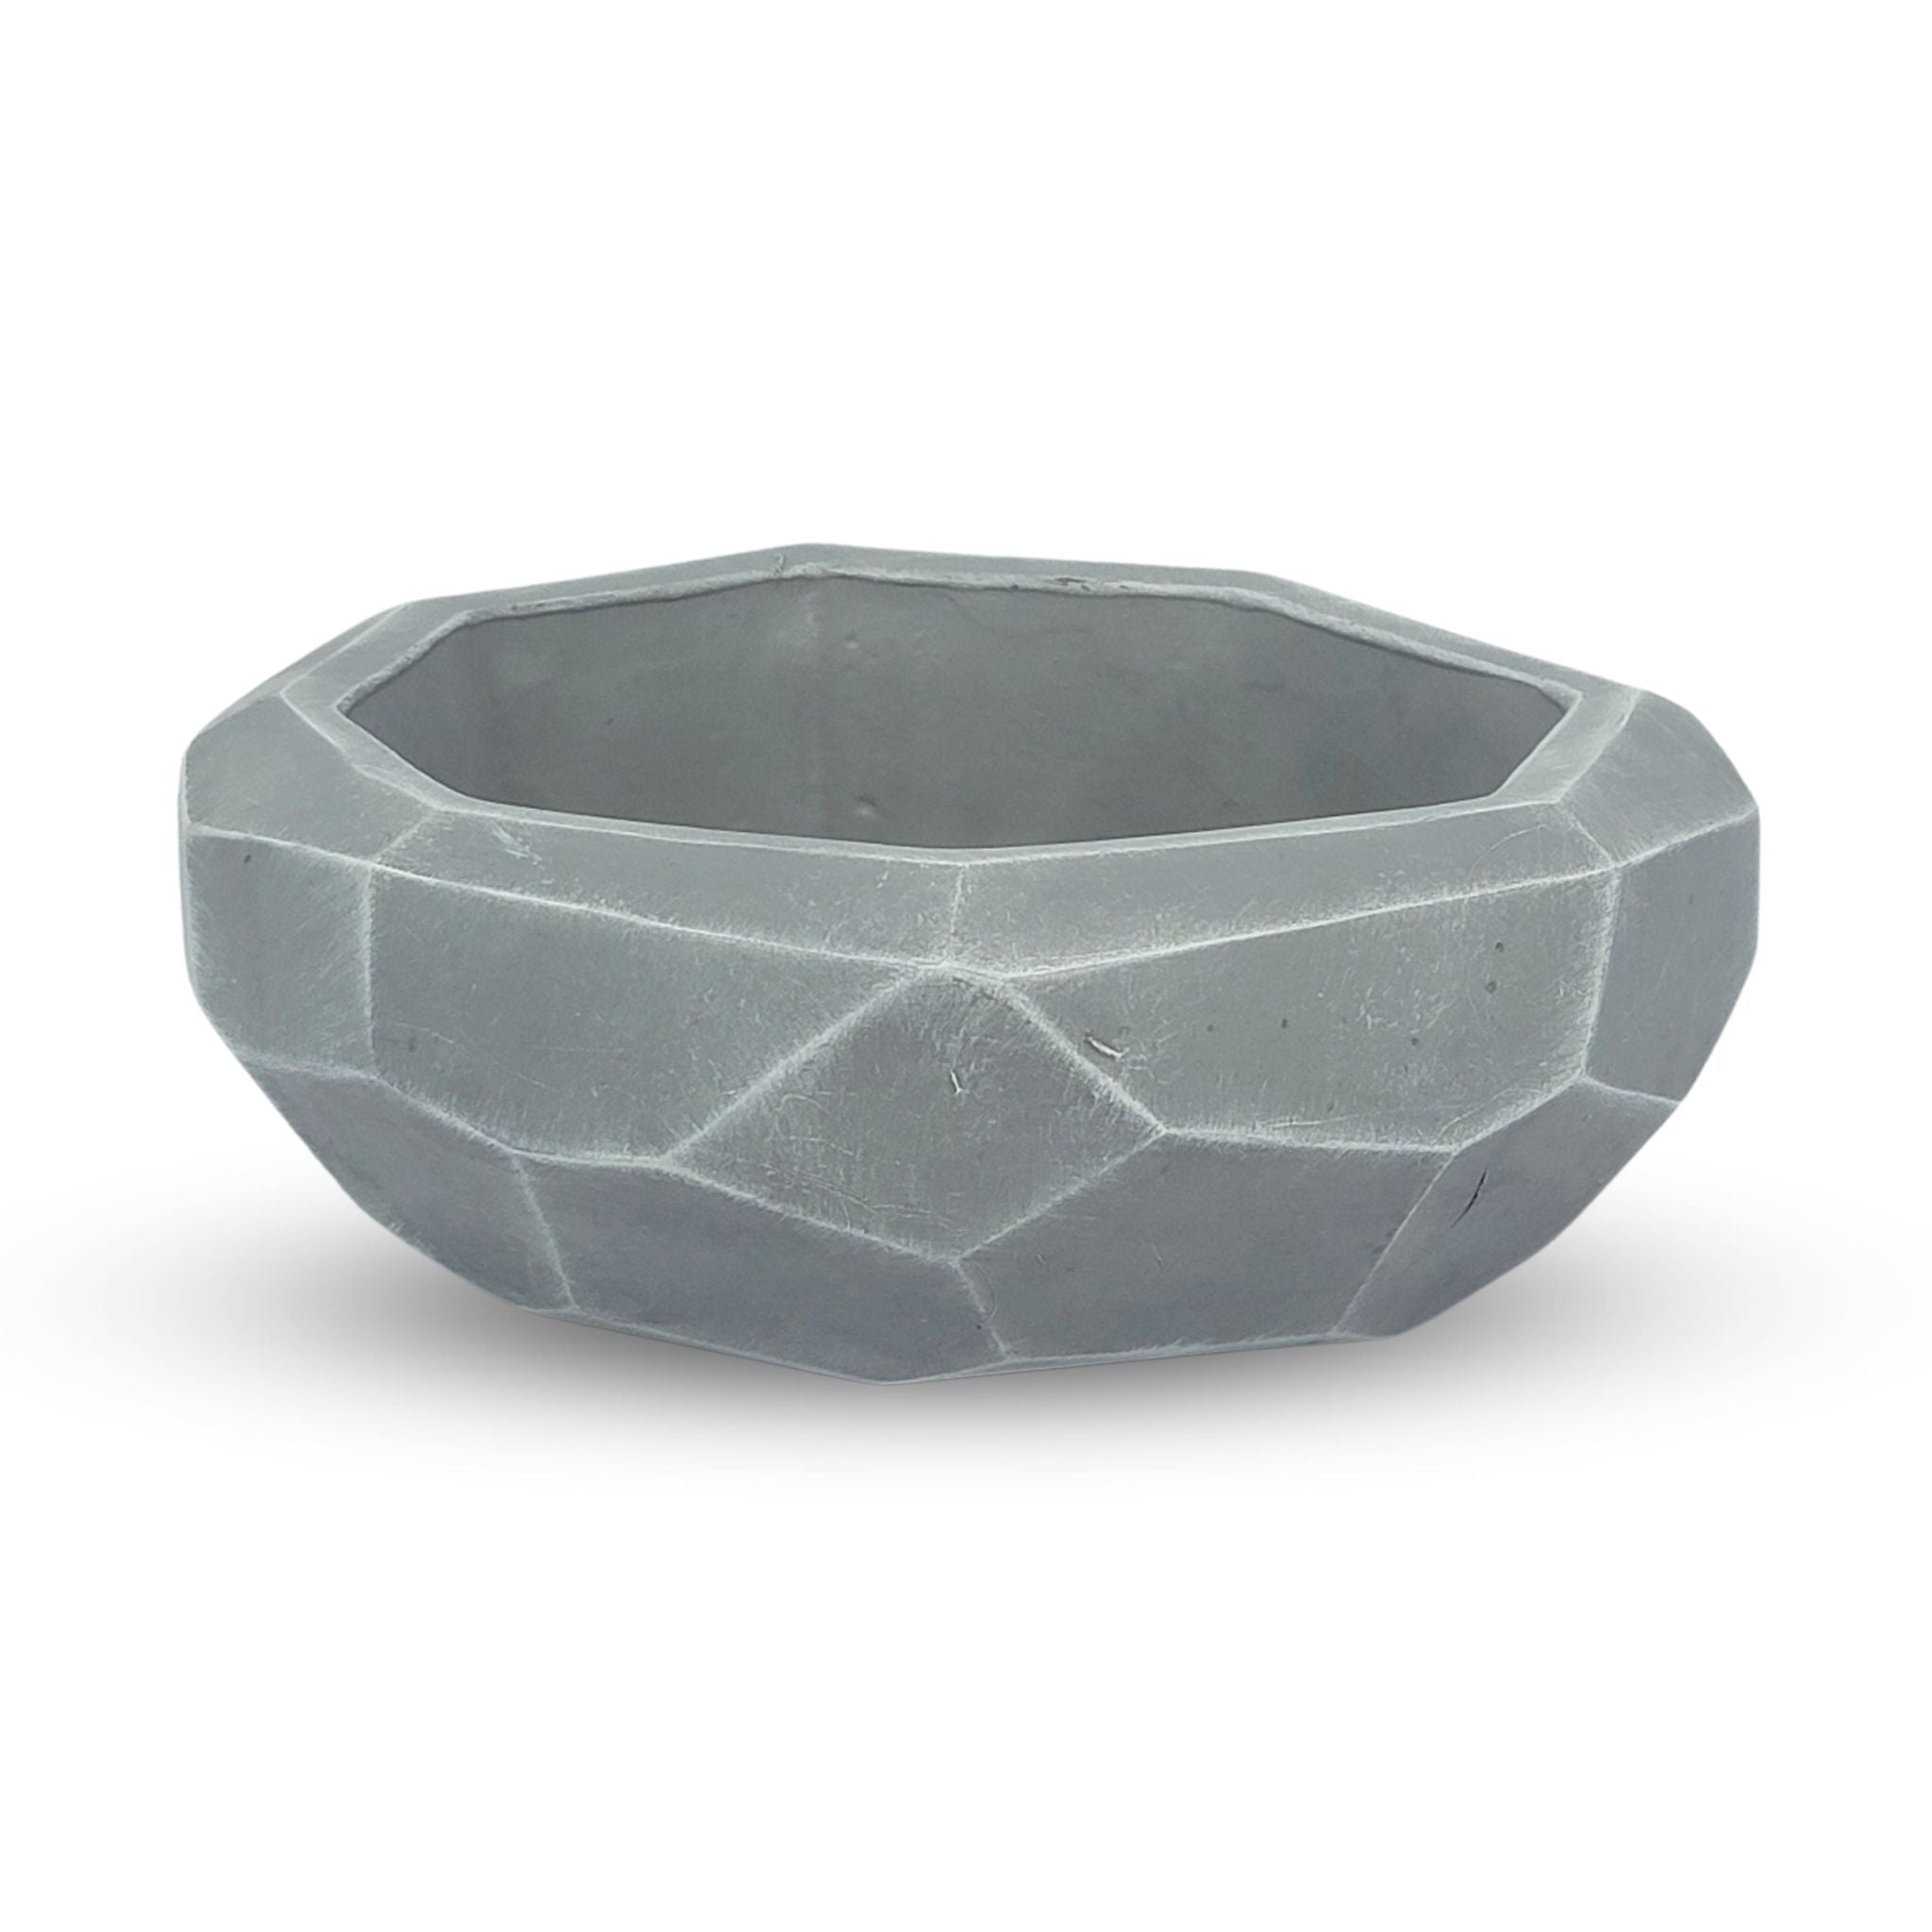 Faceted Bowl Planter - Gray White